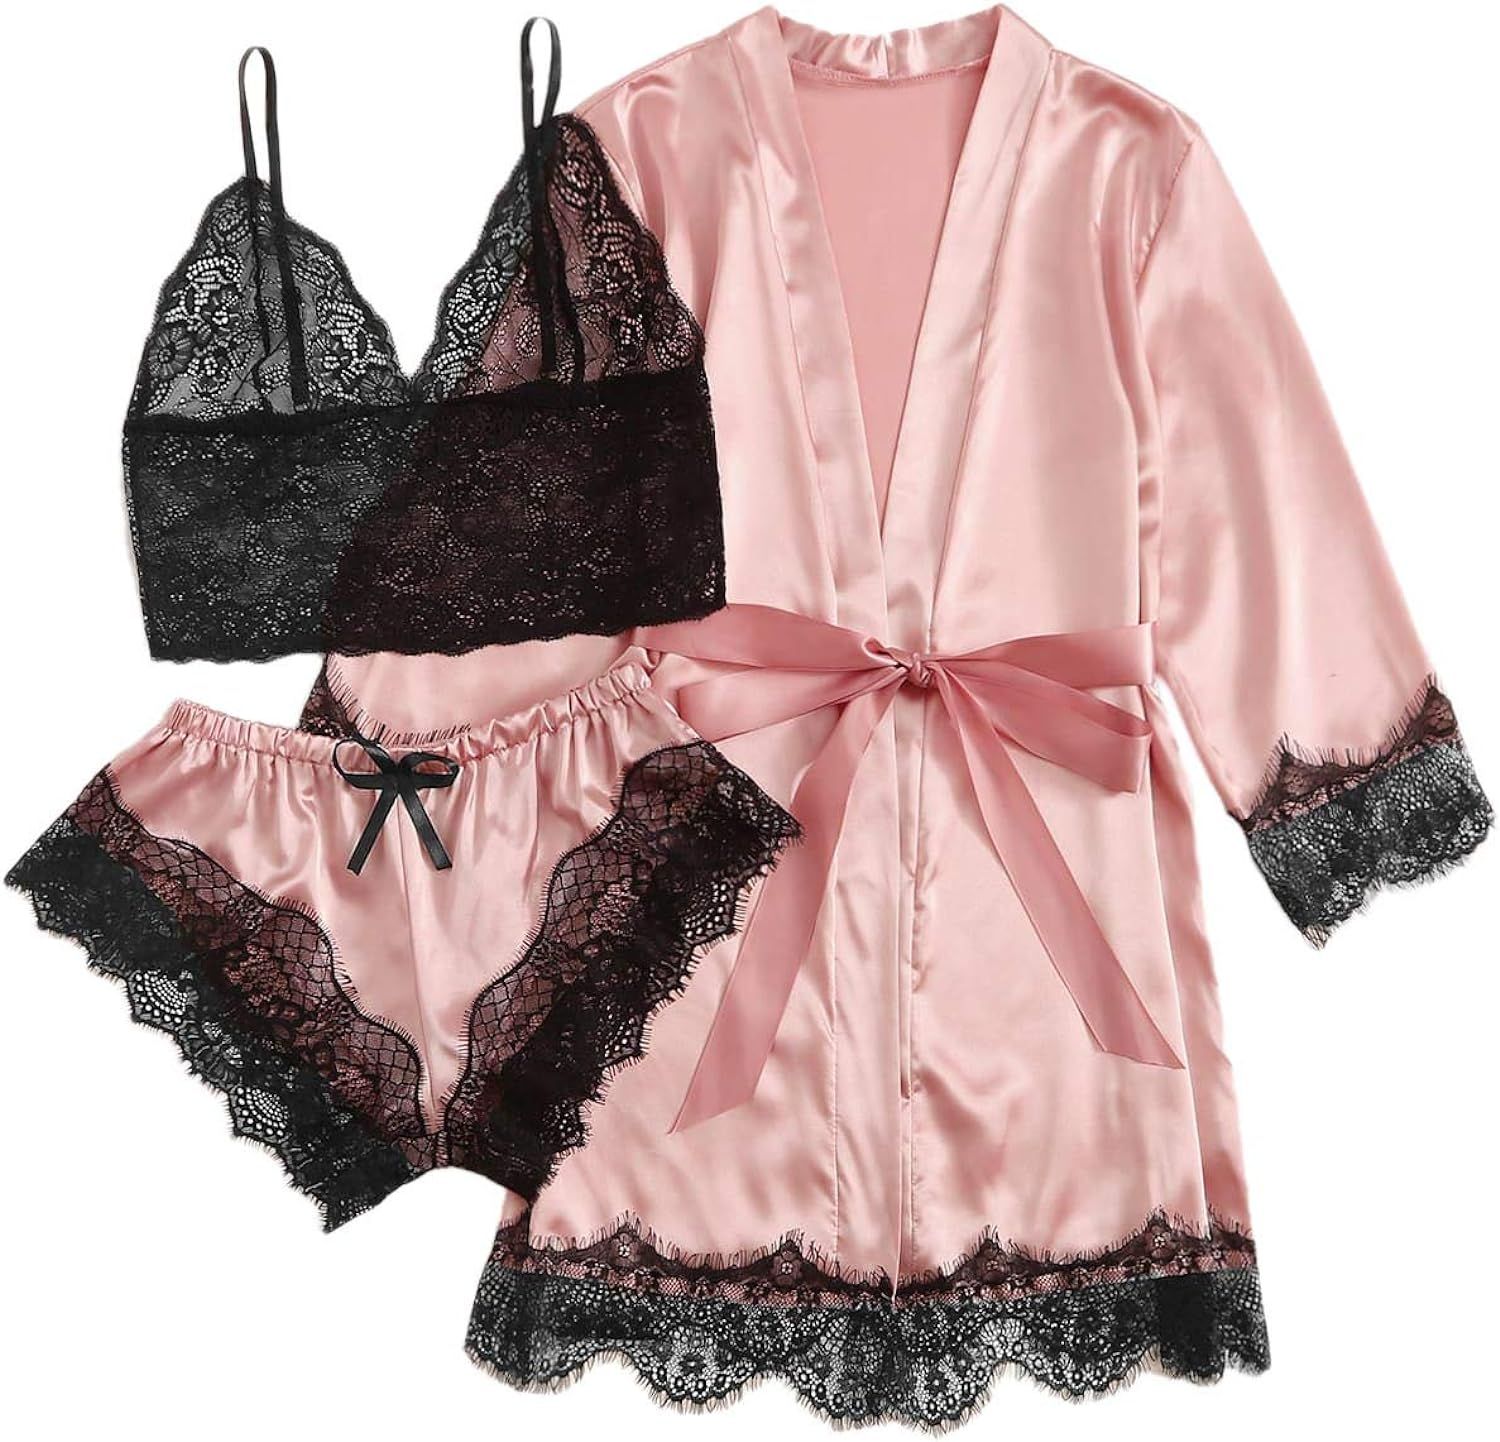 SheIn Women's Sheer Lace Bralette and Striped Shorts Pajama Lingerie Set with Robe | Amazon (US)